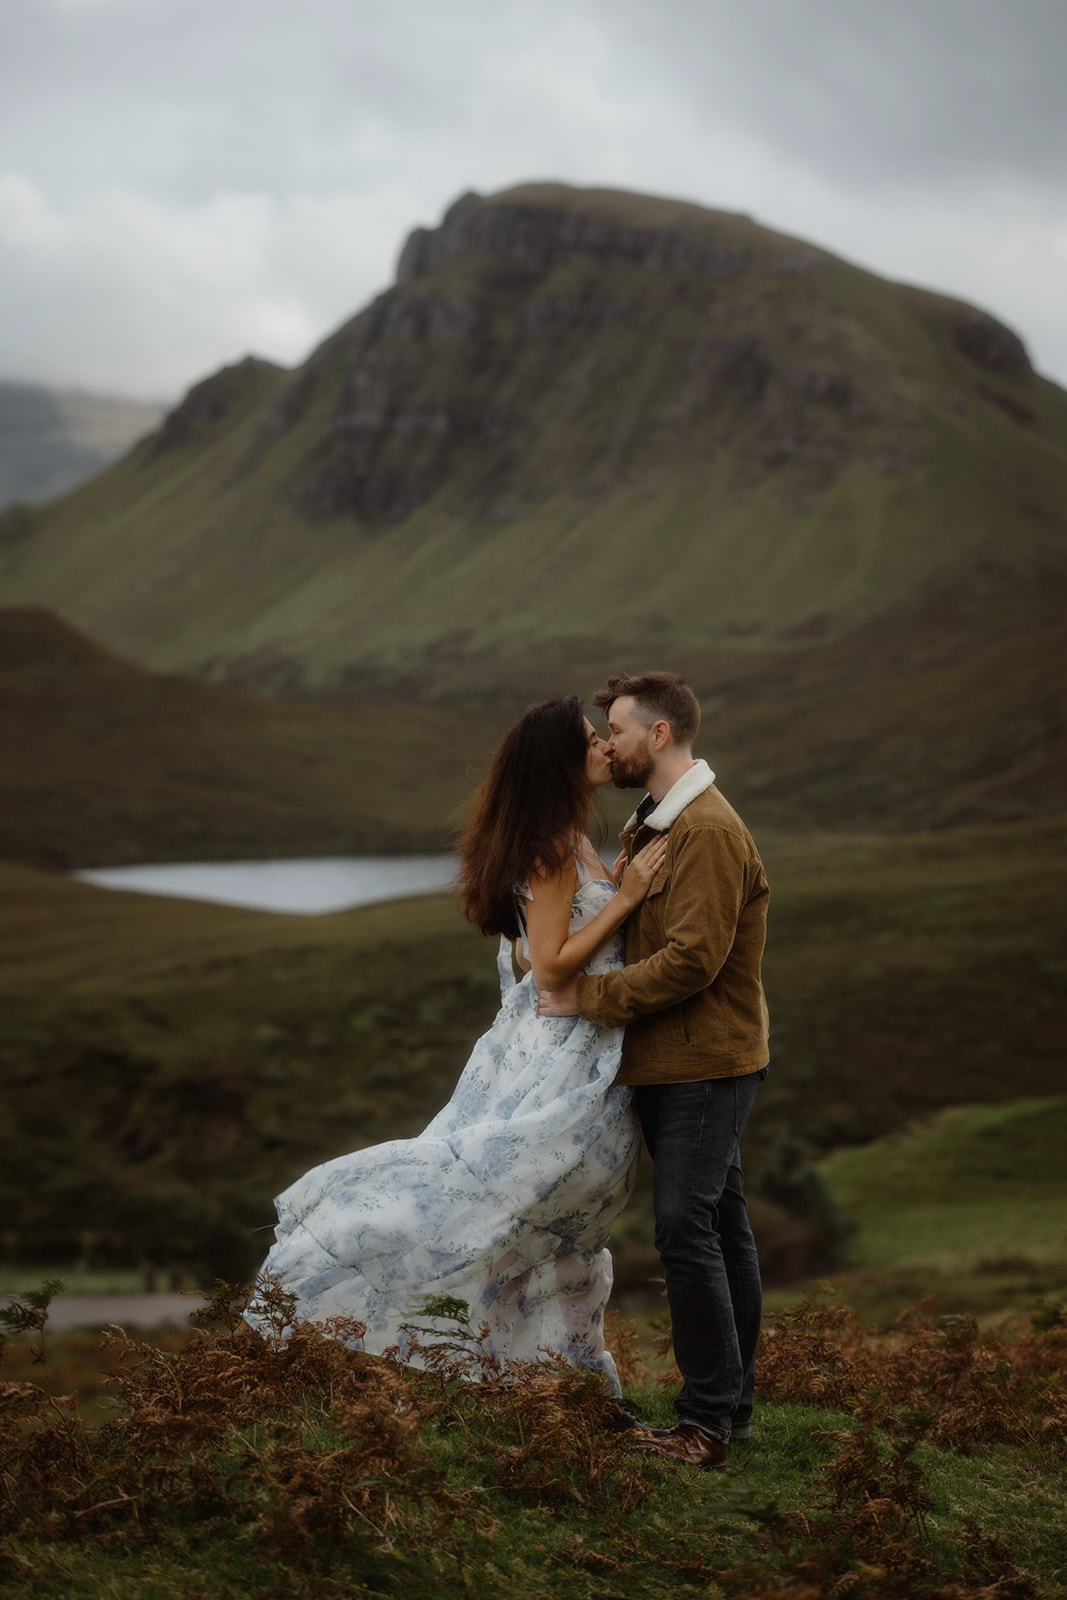 Alex and Elliot shared an intimate moment during their Isle of Skye adventure last September.